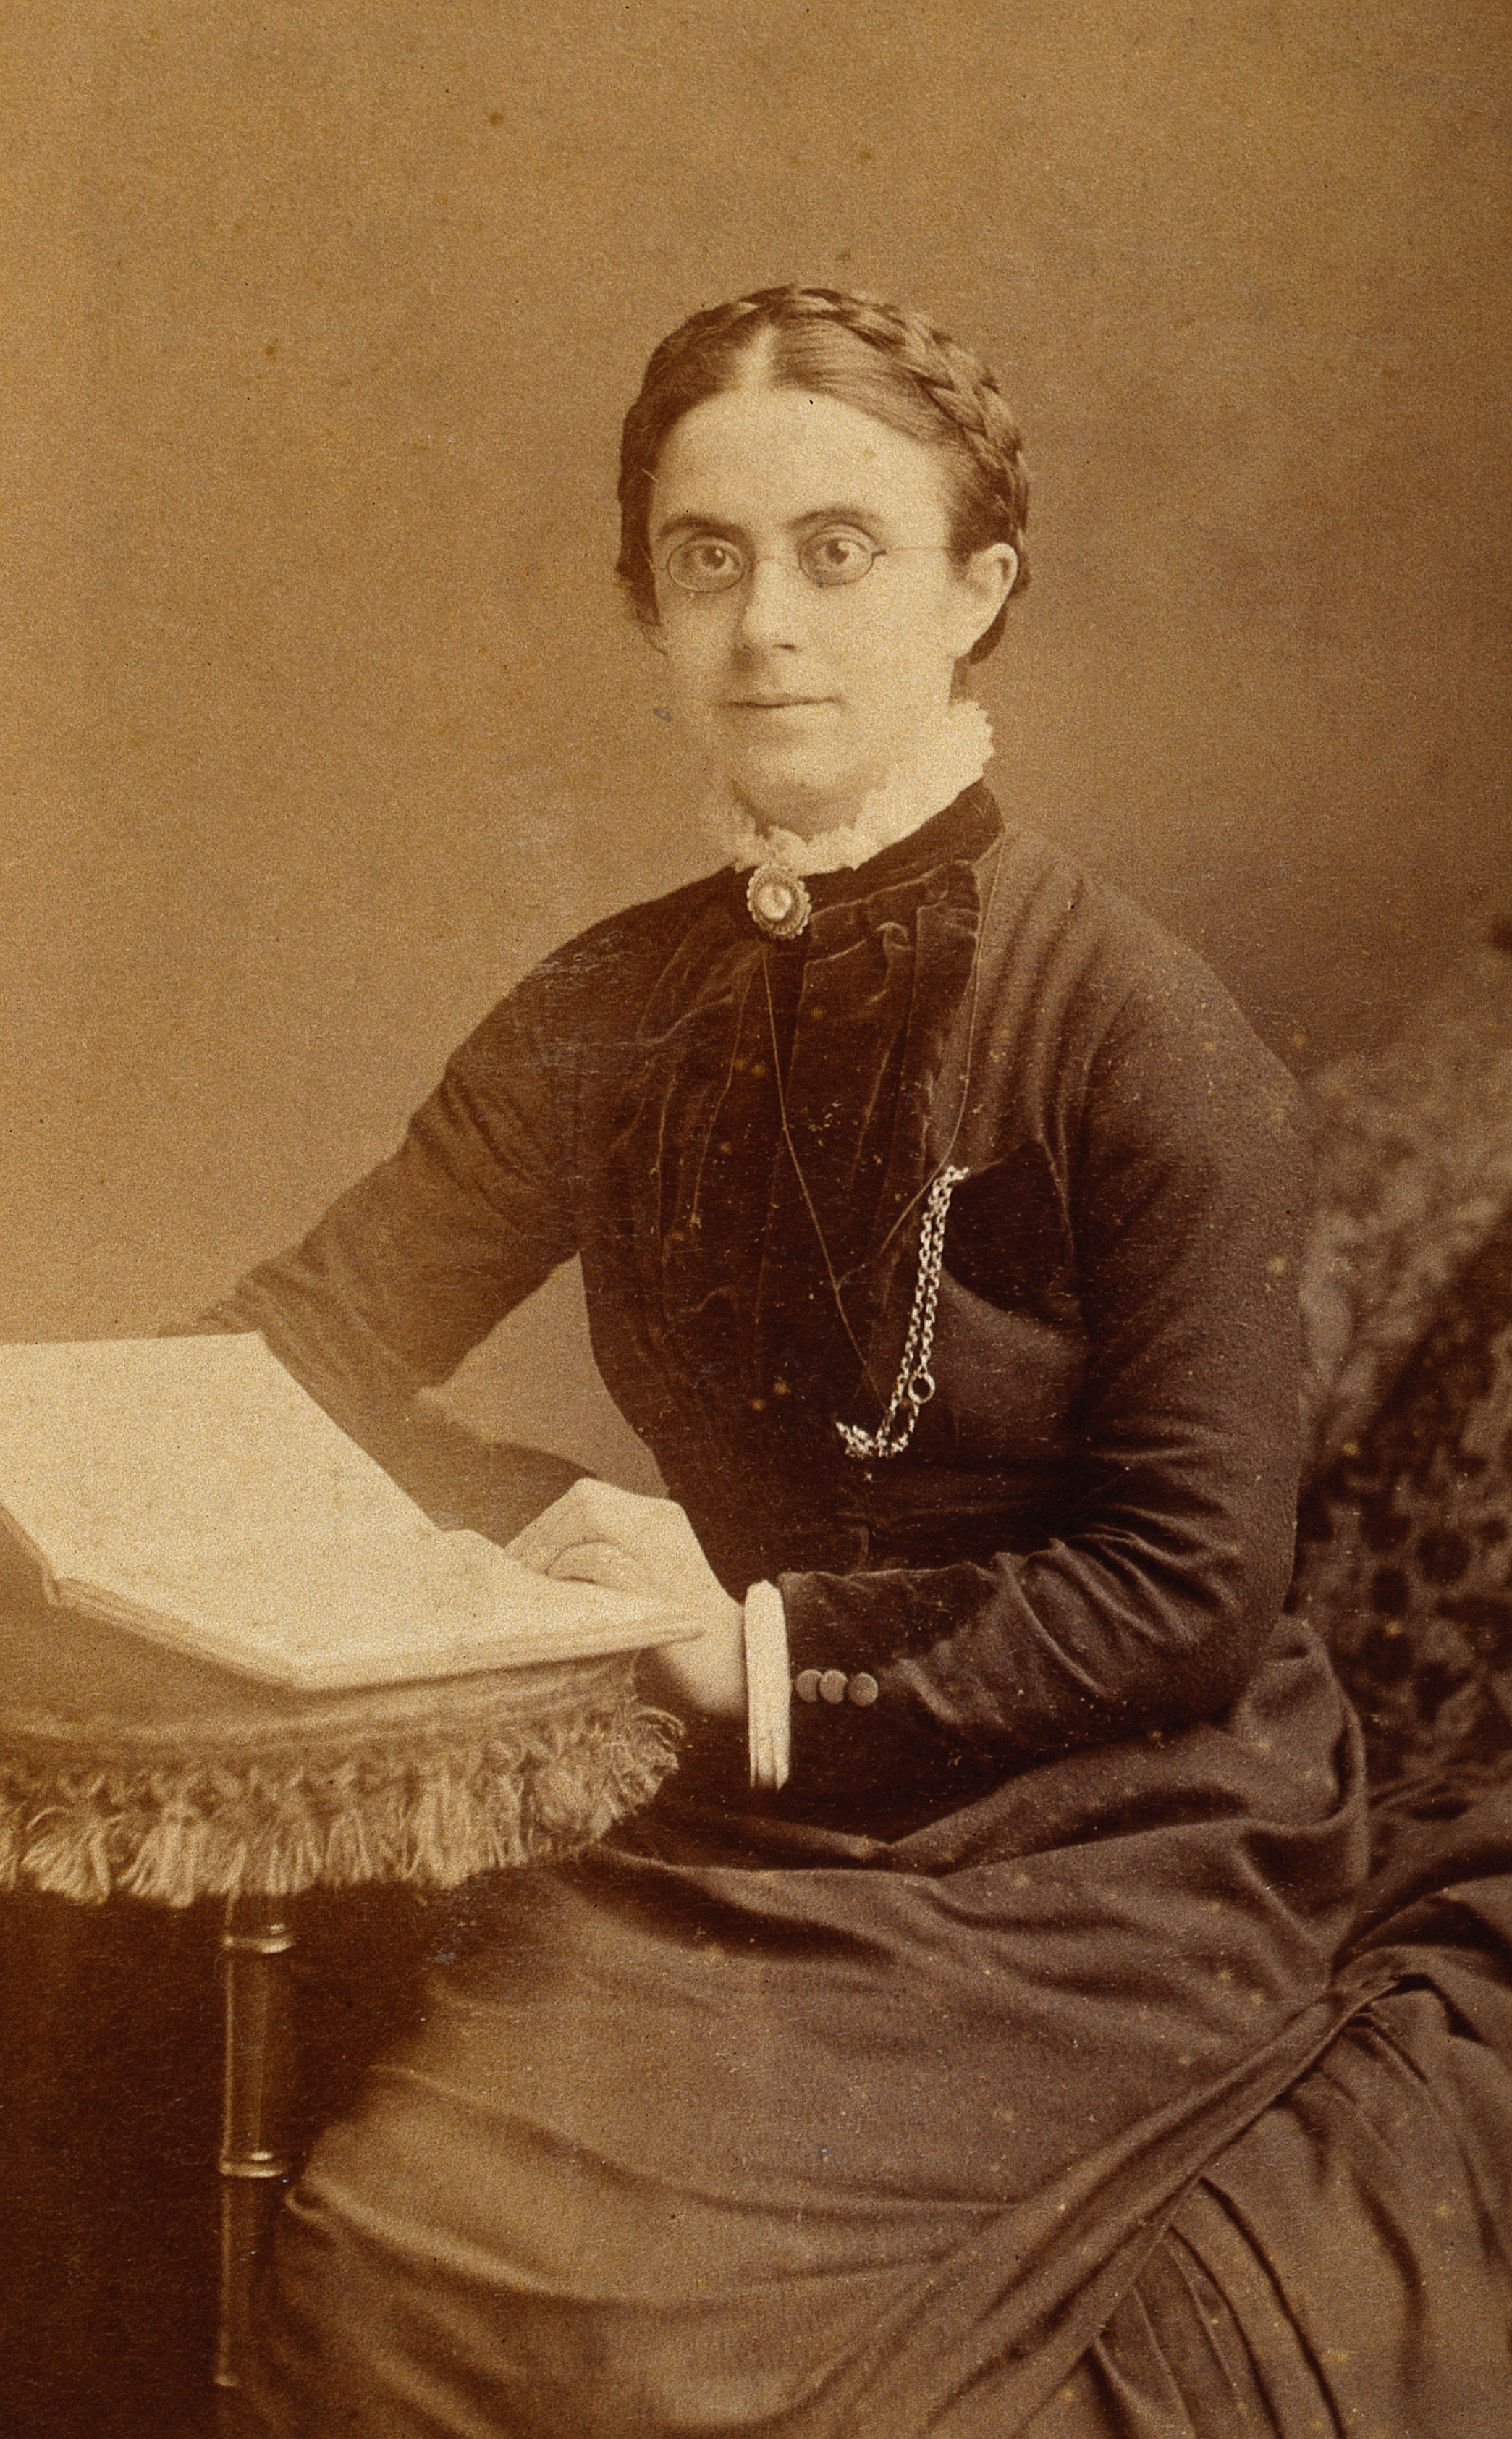 Miss Pailthorpe. Photograph by T.C. Turner. Wellcome V0028336